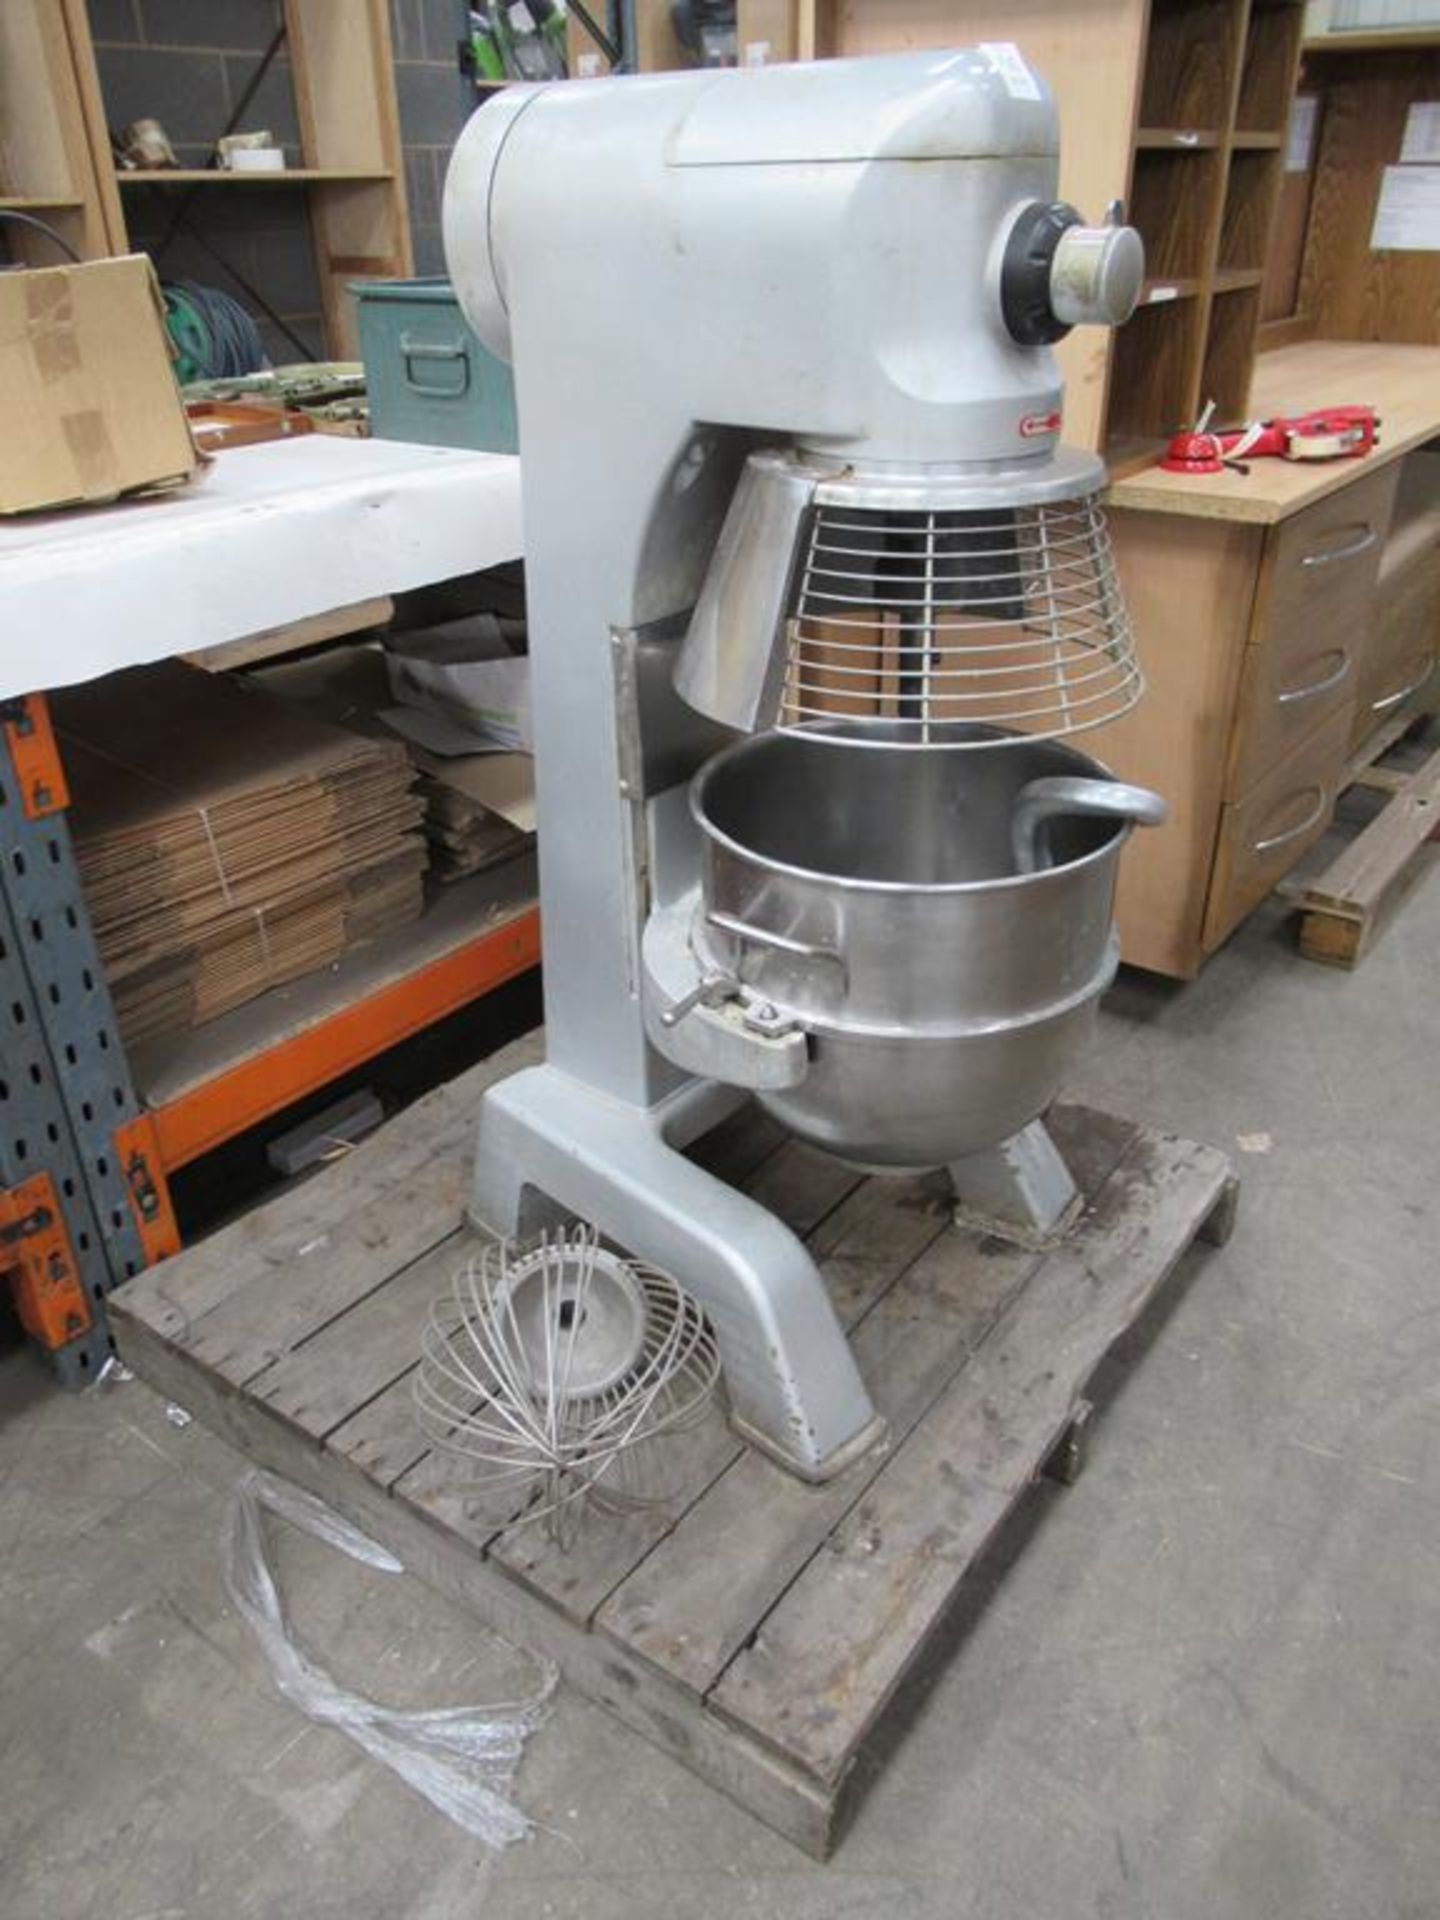 FM40 mixer s/n 08060225 YOM 2008 with bowl and whi